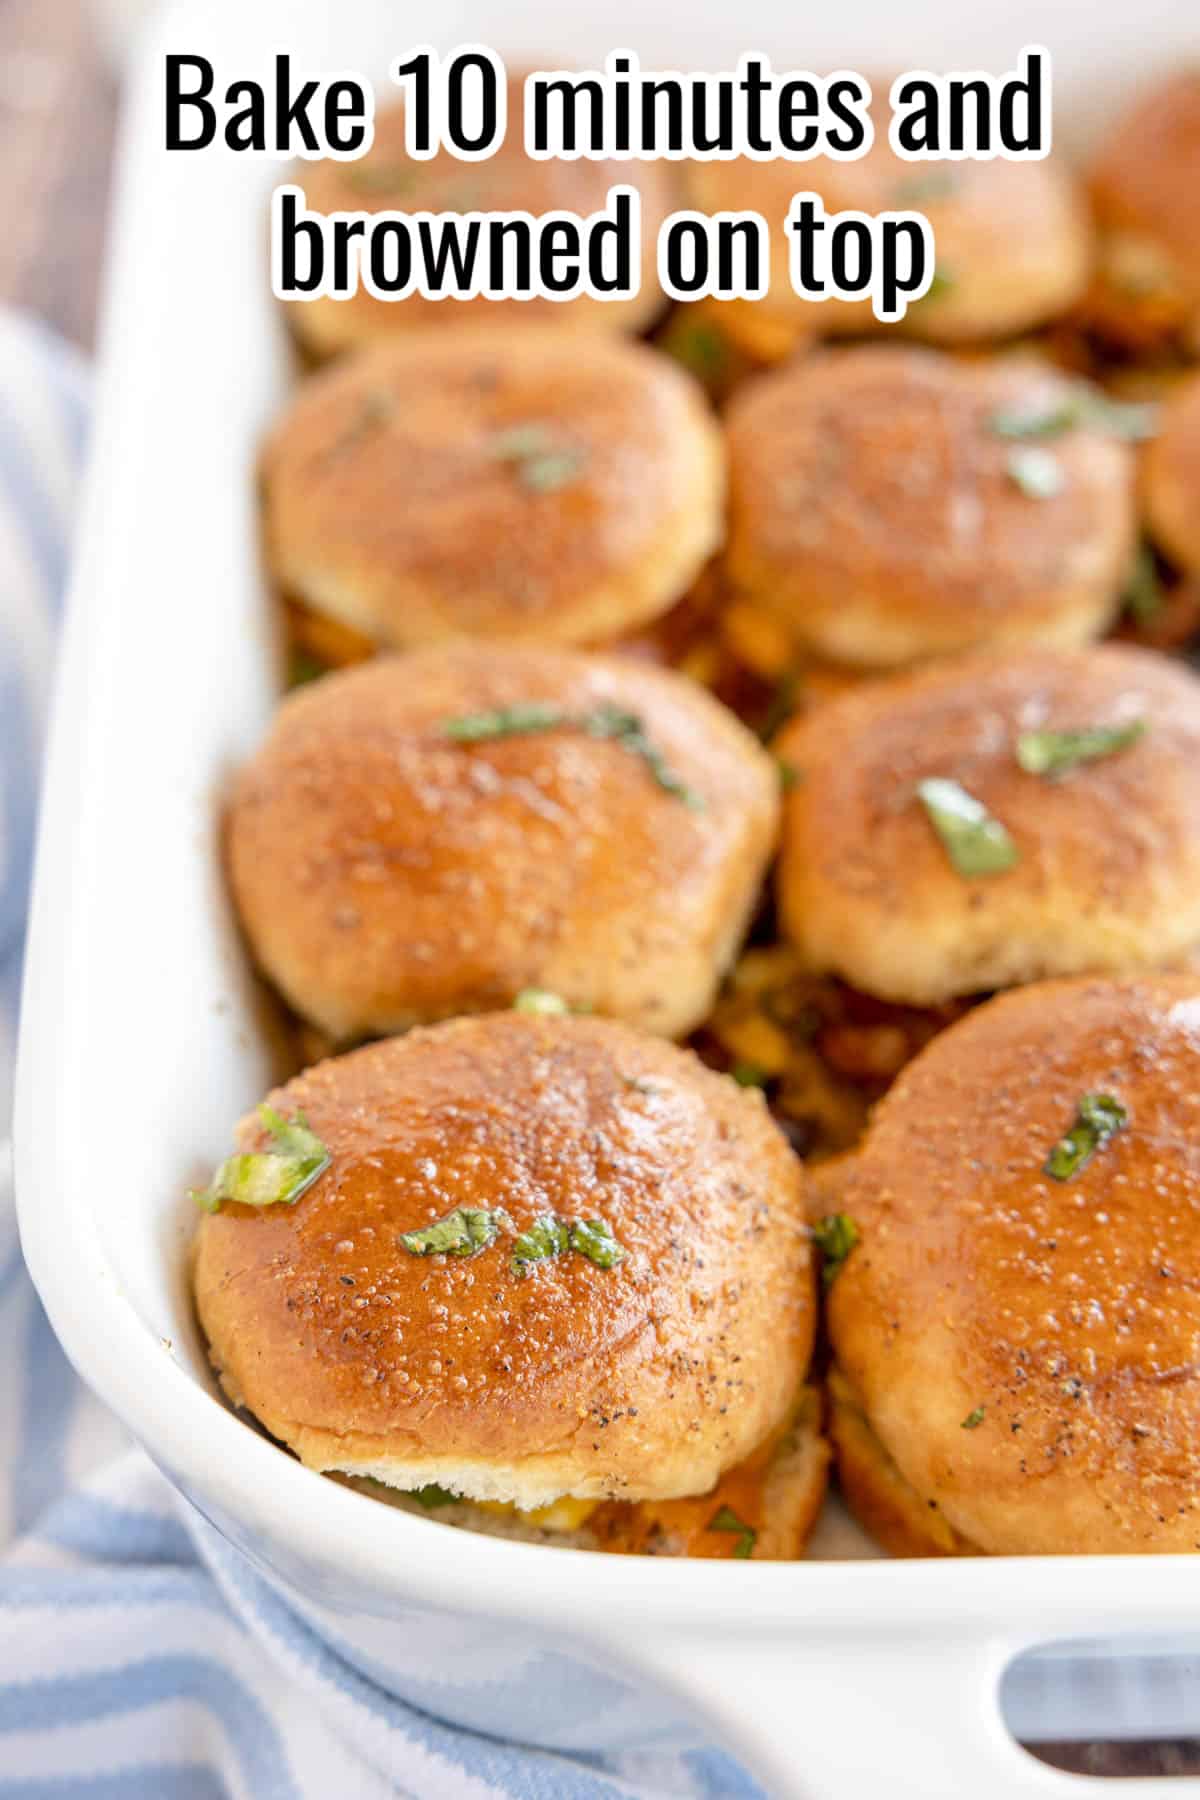 baked sliders in a white baking dish.